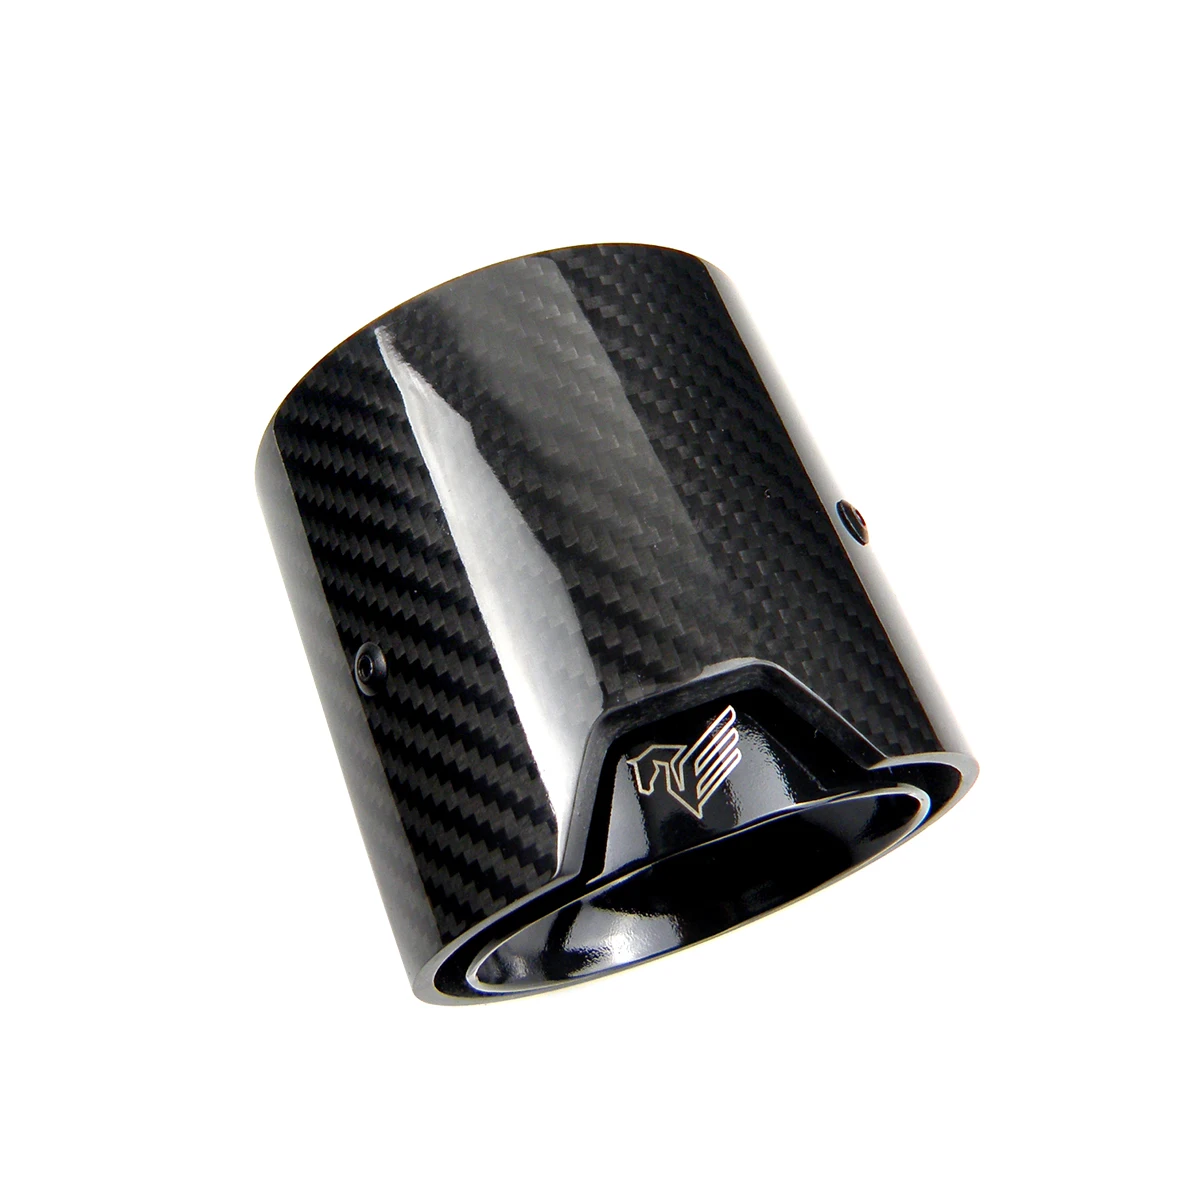 1 Piece M LOGO glossy stainless steel Carbon Fiber Exhaut tip  for BMW M2 M3 M4 M135i M235i M140i M240i M335i M340i